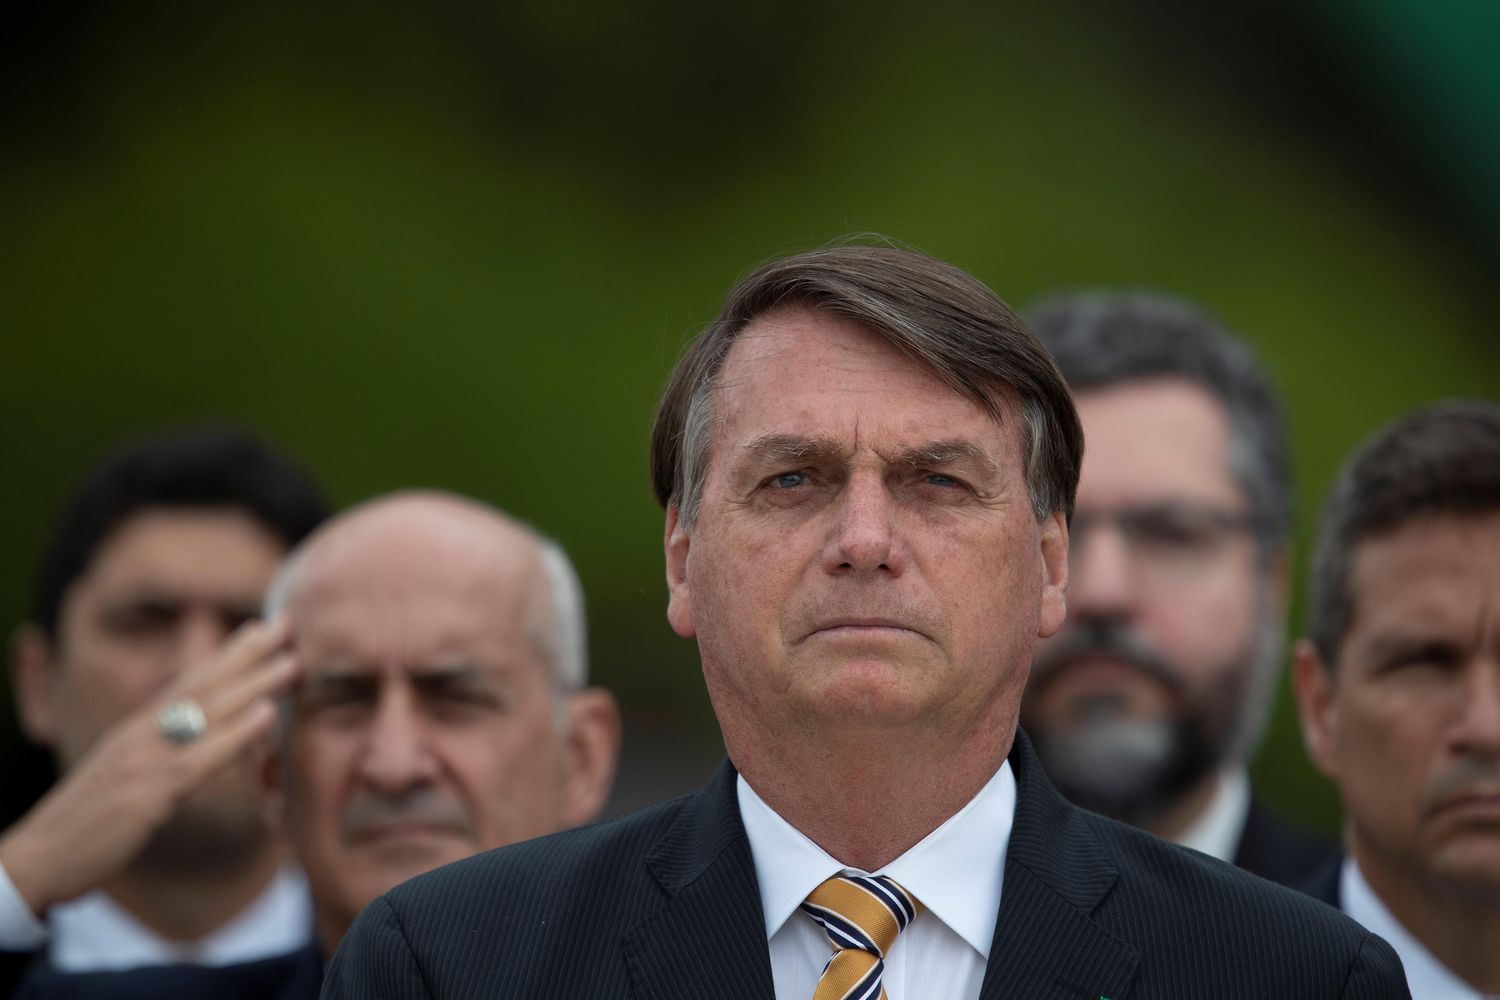 On Monday night, December 14th, President Jair Bolsonaro confirmed that he will grant R$20 (US$3.9) billion through a provisional measure for the purchase of Covid-19 vaccines.